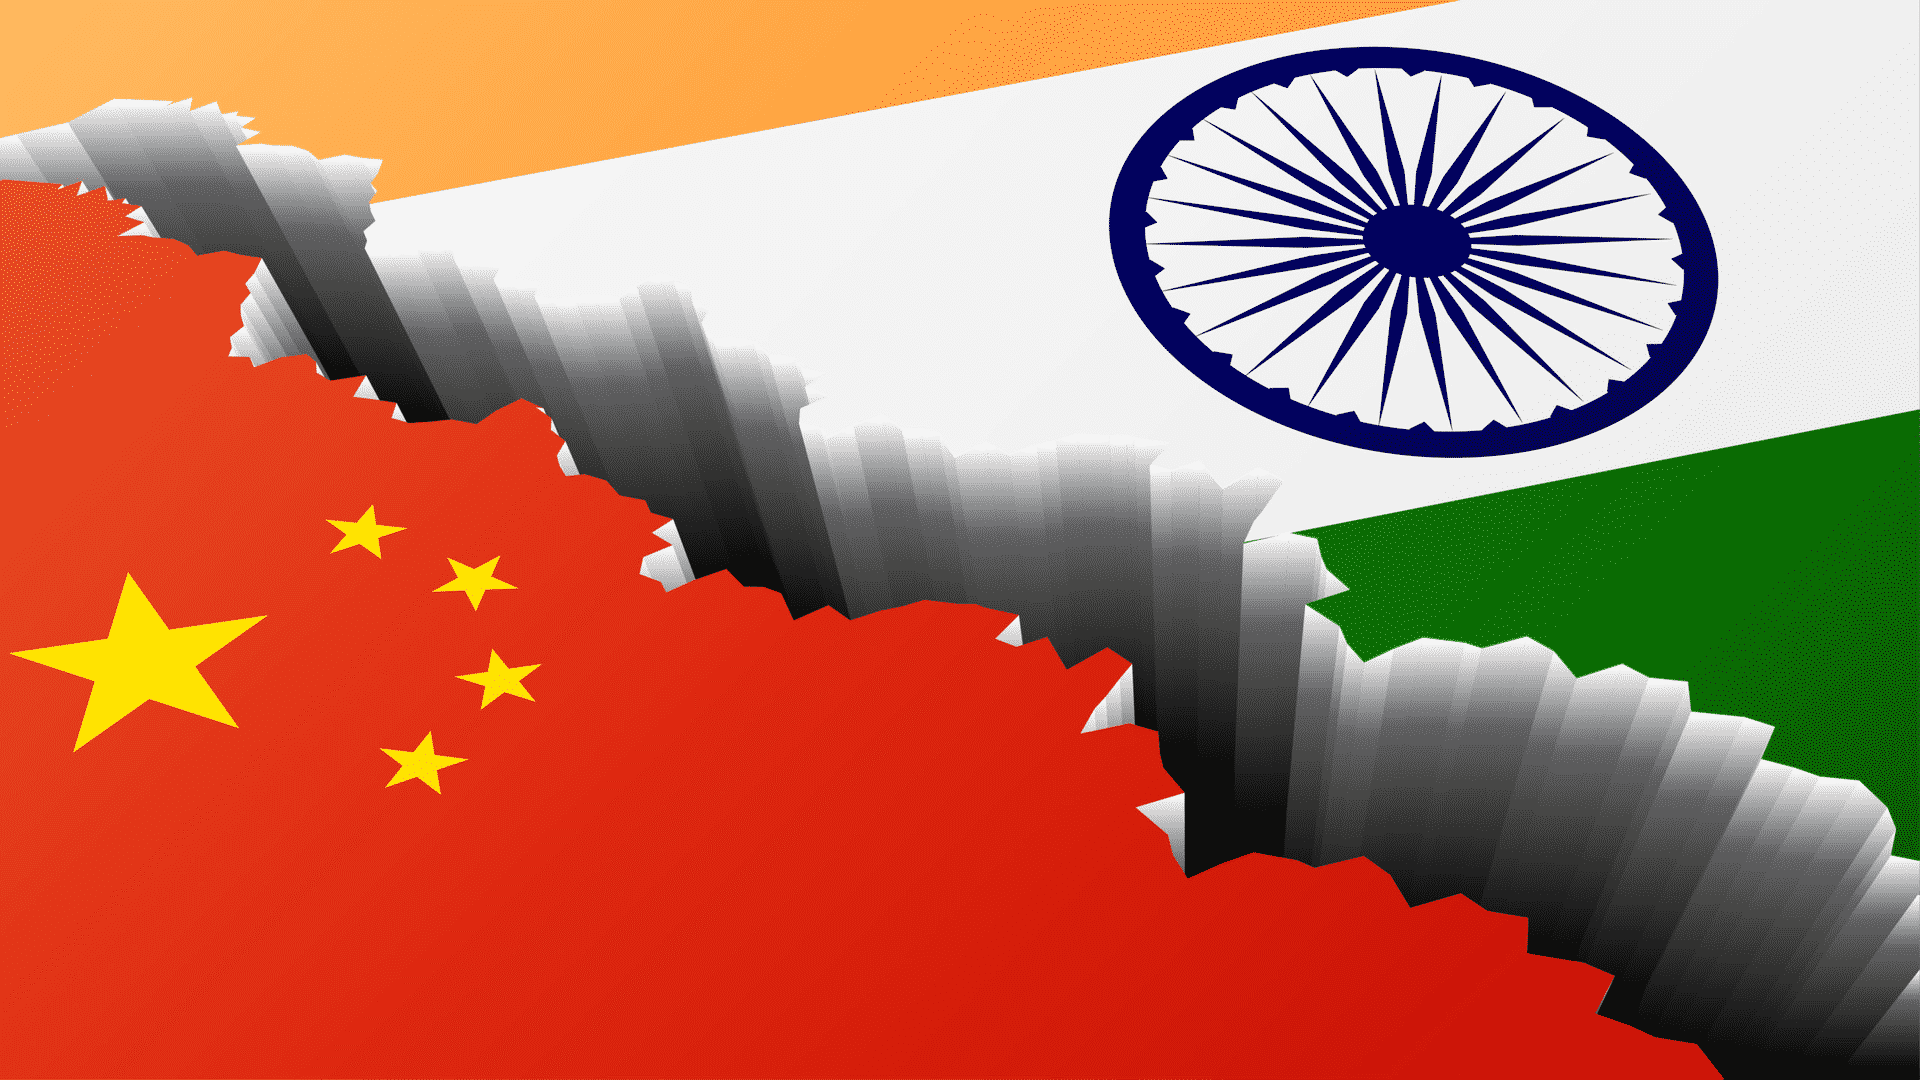 India-China relations are still rough